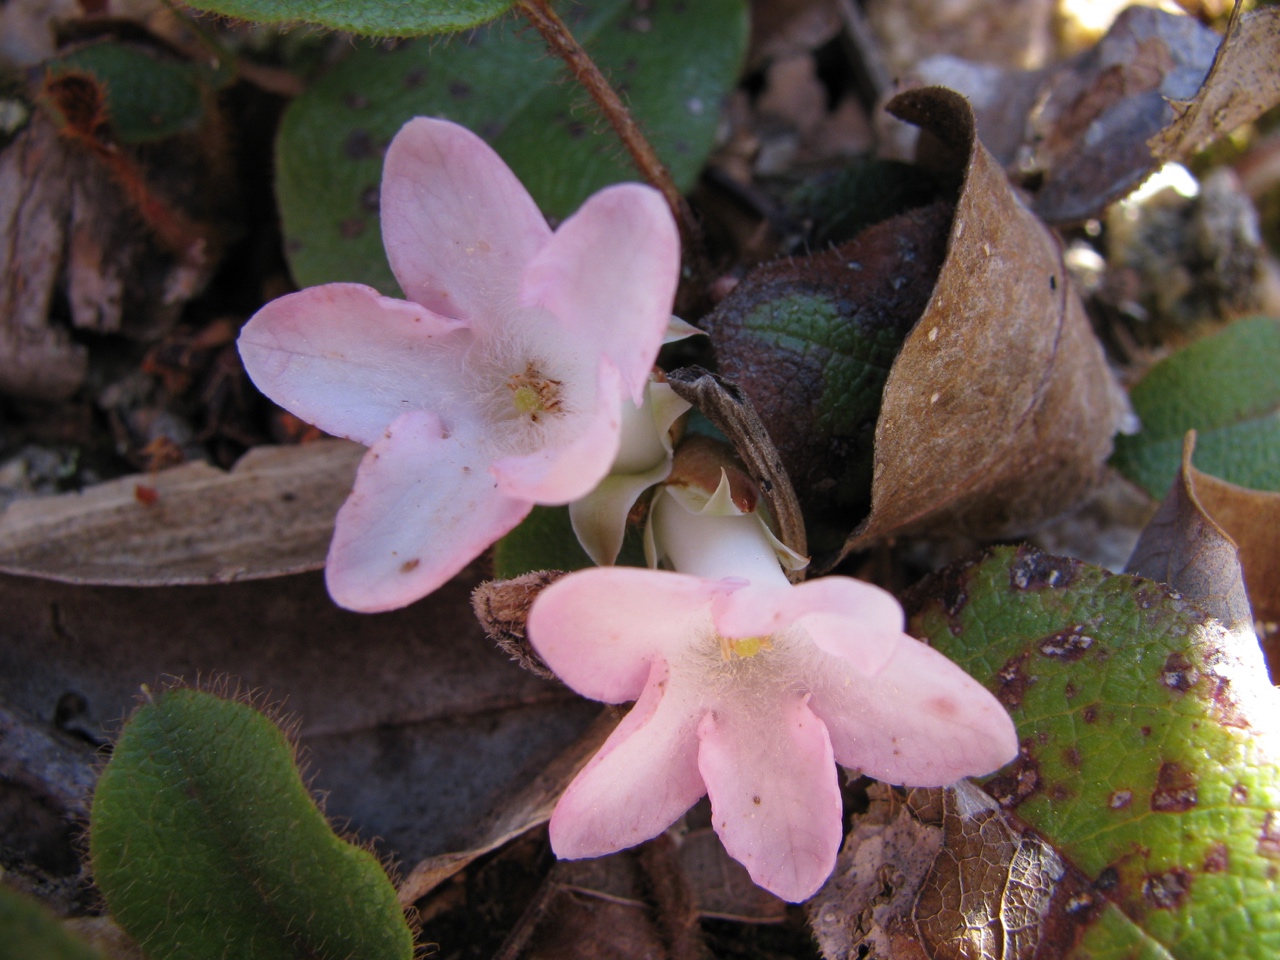 The Scientific Name is Epigaea repens. You will likely hear them called Trailing Arbutus, Mayflower, Ground Laurel. This picture shows the Flowers can be white or pink of Epigaea repens